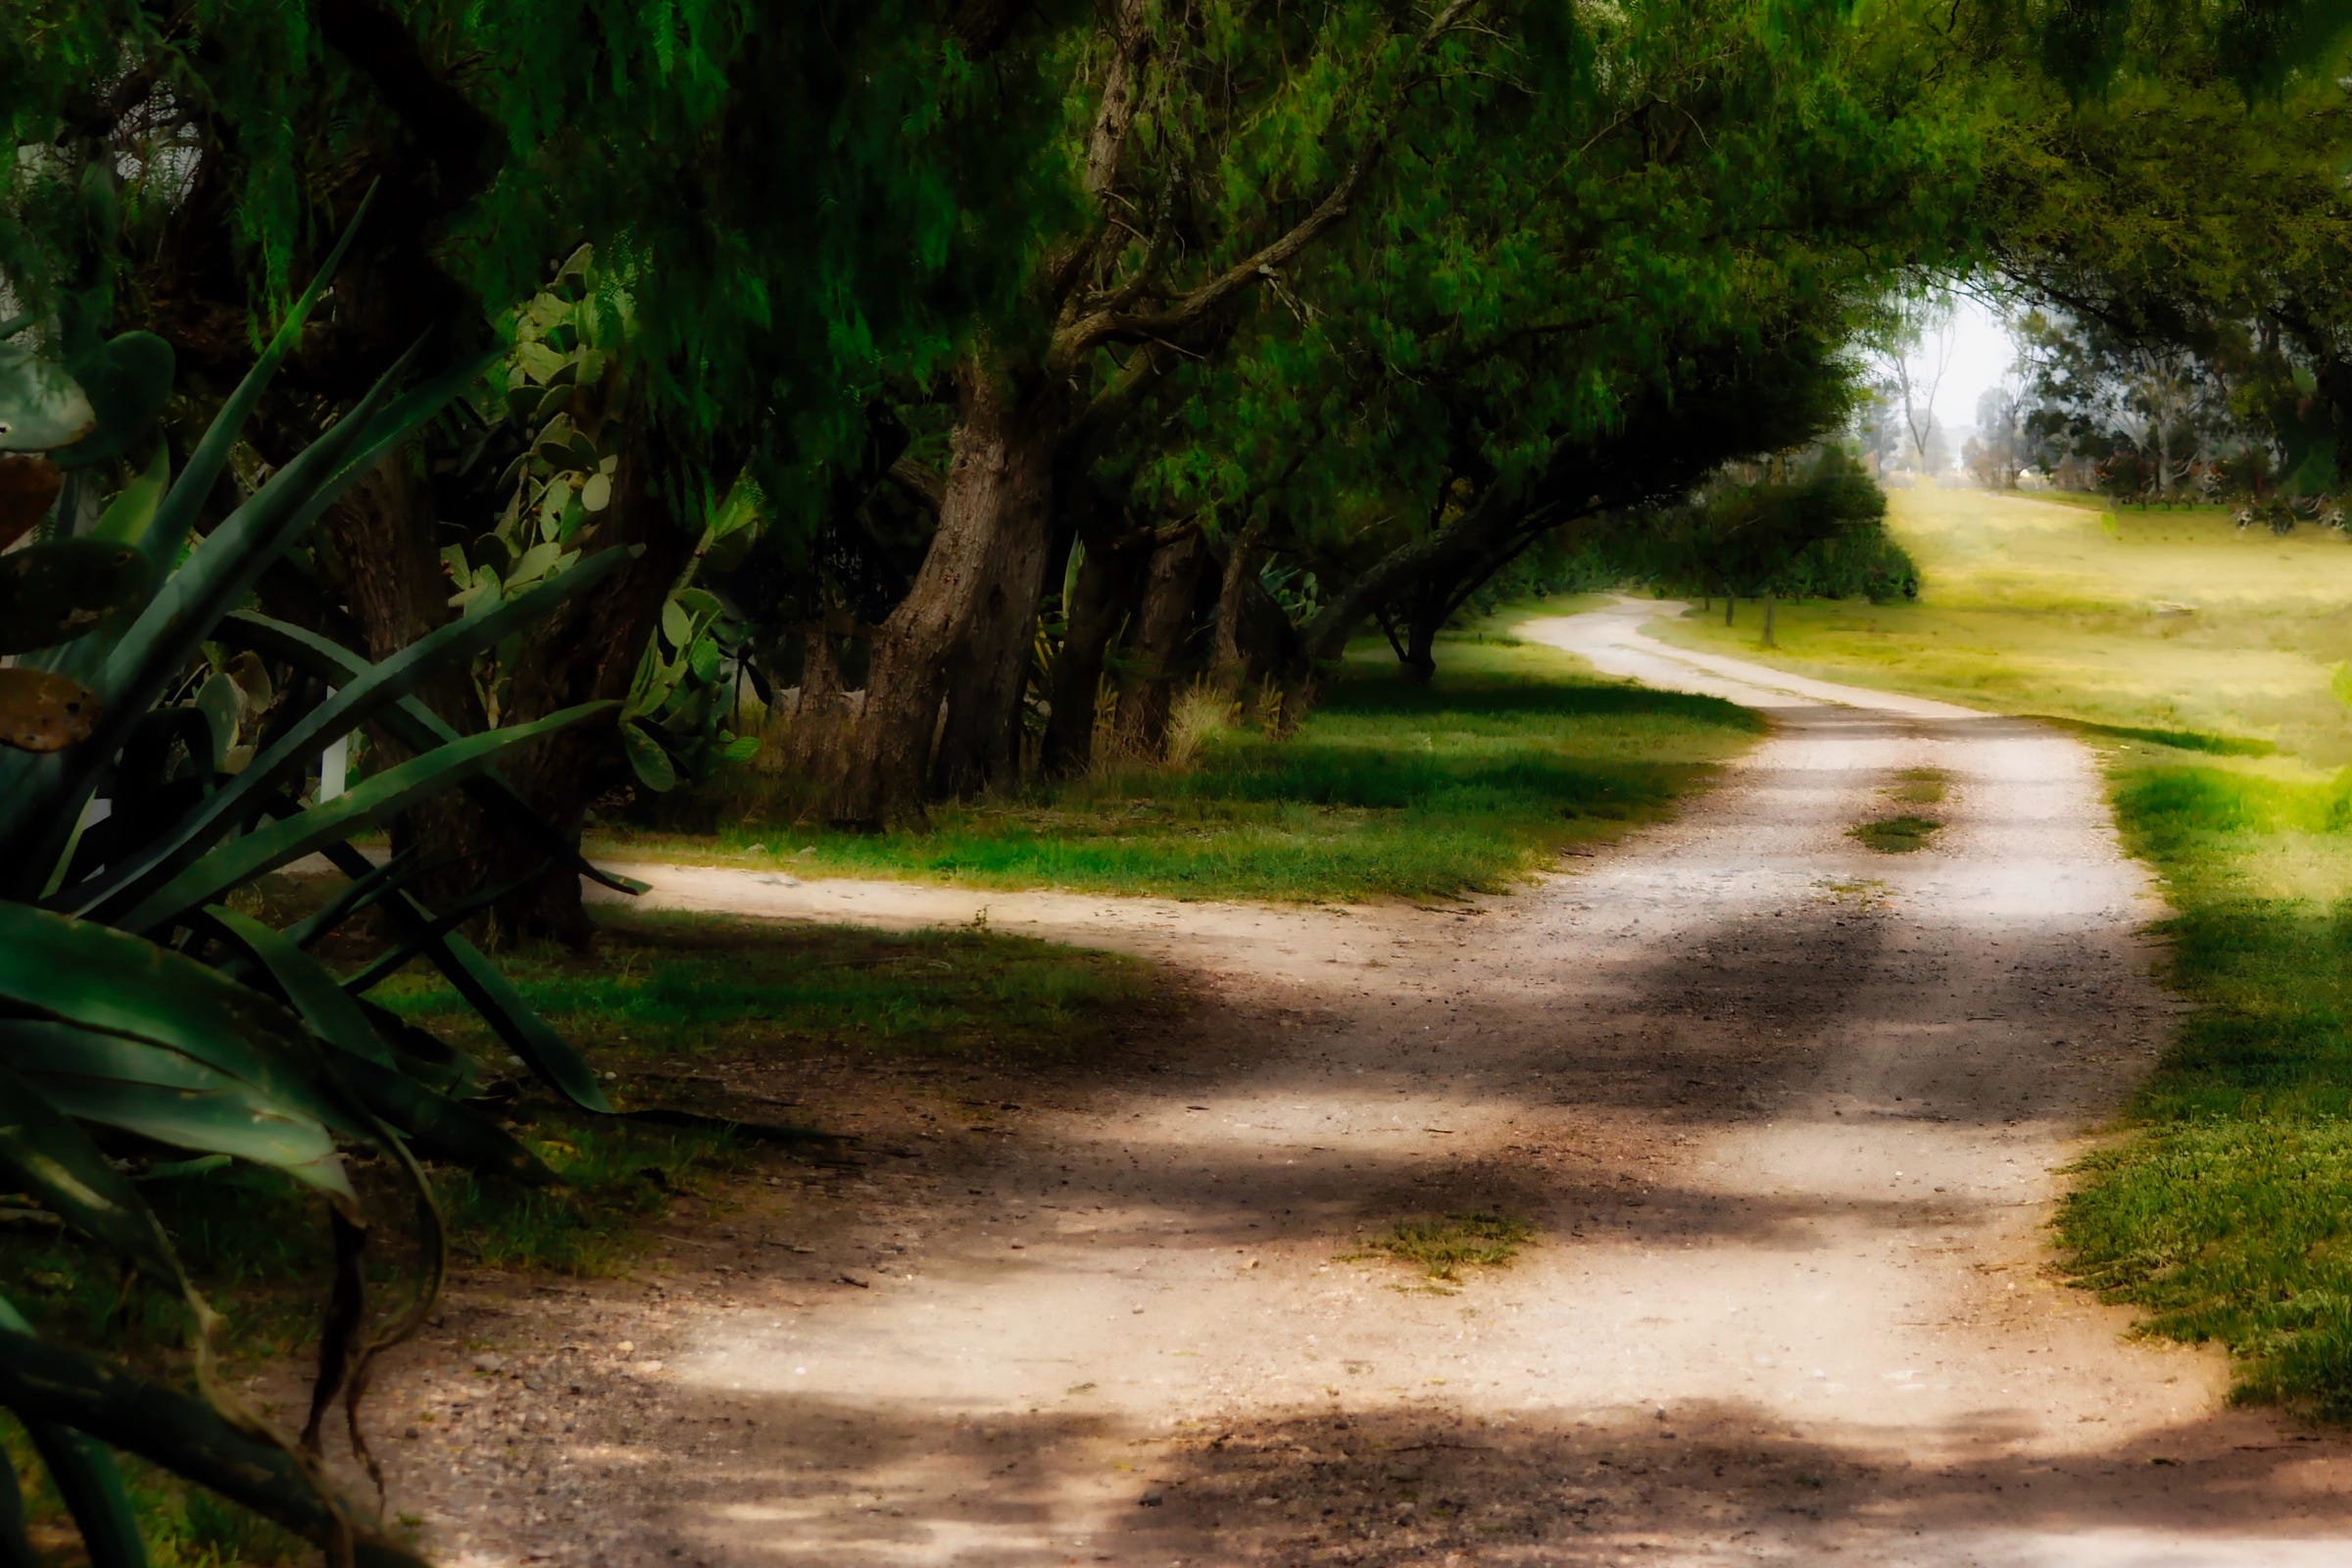 A mystical photo of a dirt road with a turn to the left half-way down the road with shadowy dark green trees on the left side of the road and a small  patch of blue sky on the top right corner of the scene